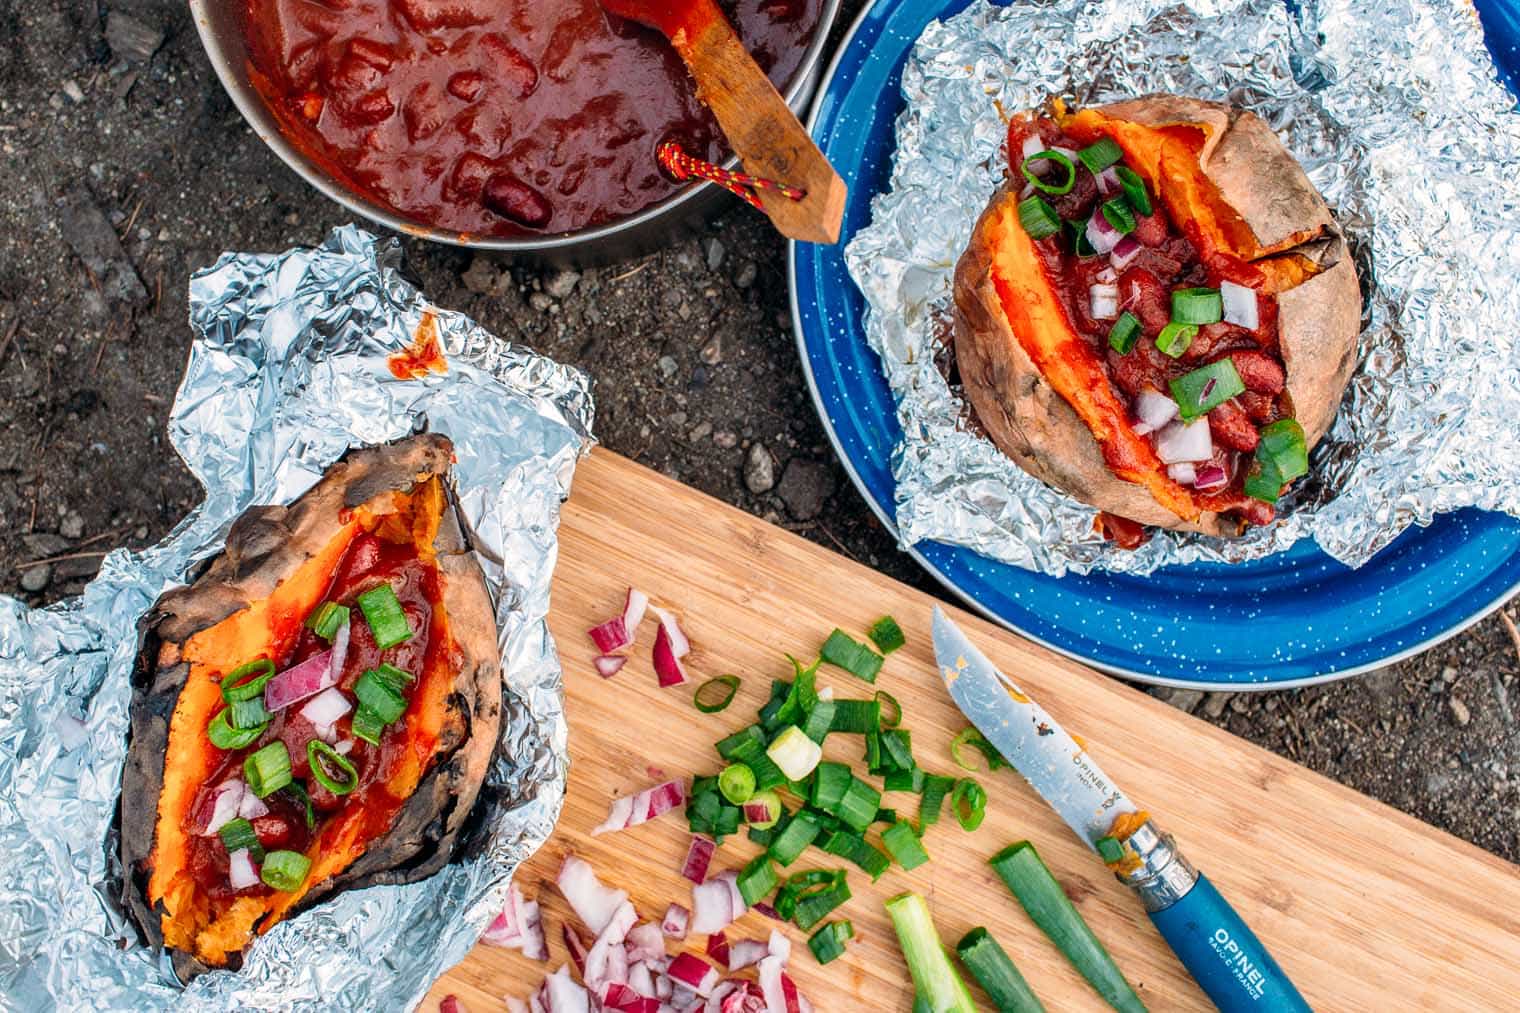 Sweet potatoes stuffed with chili in foil surrounded by toppings